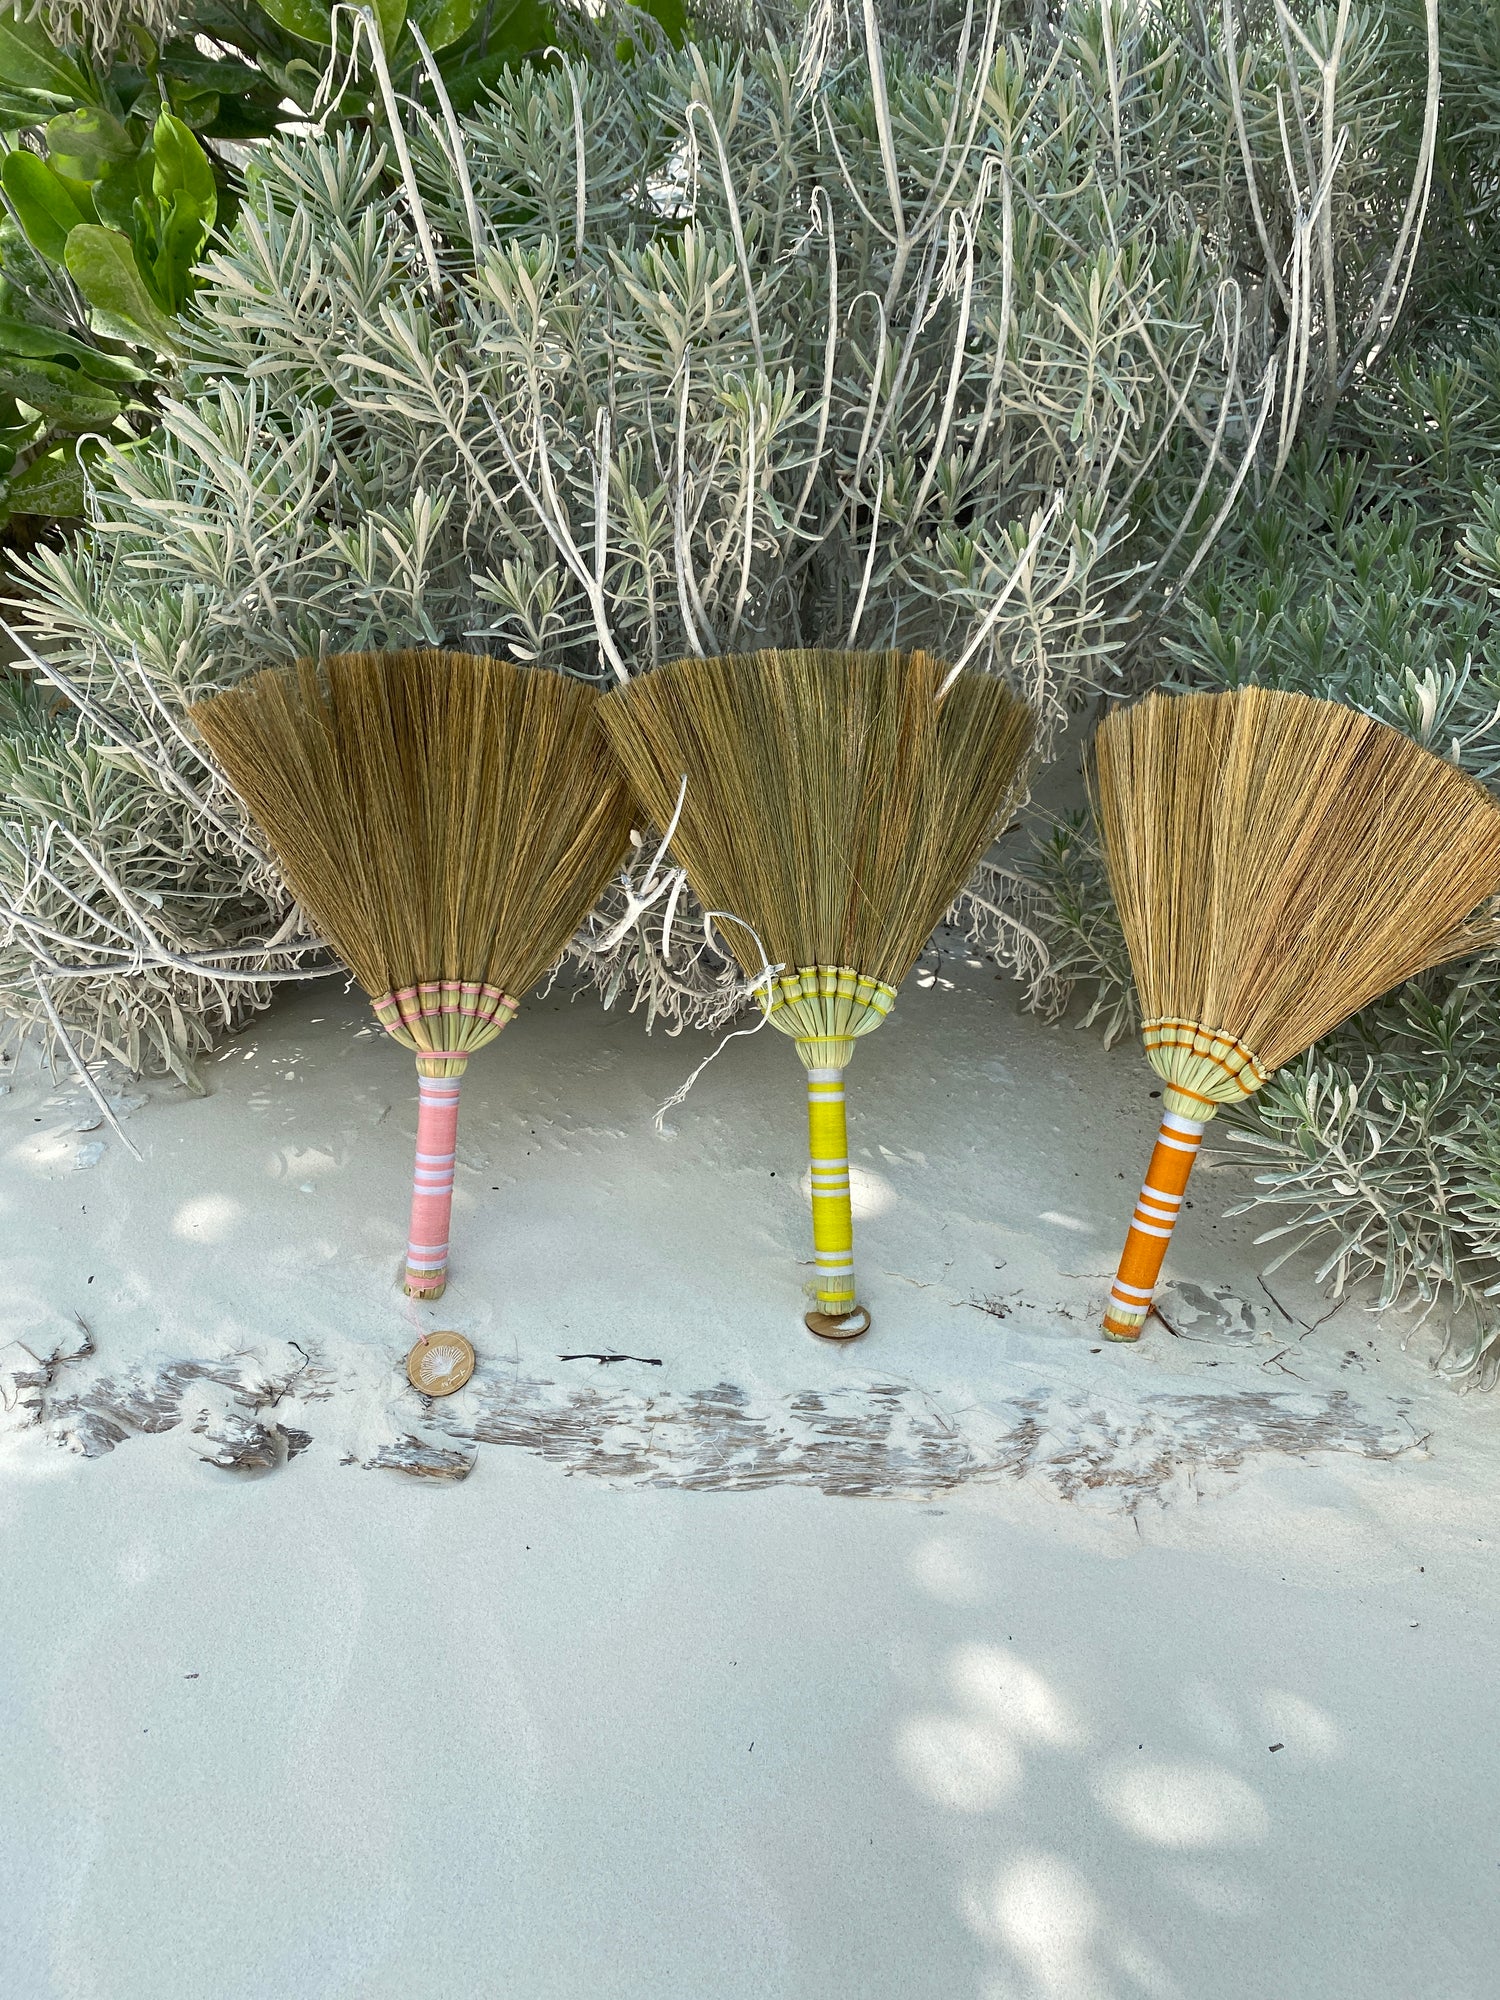 My Summer fan beach brooms collection